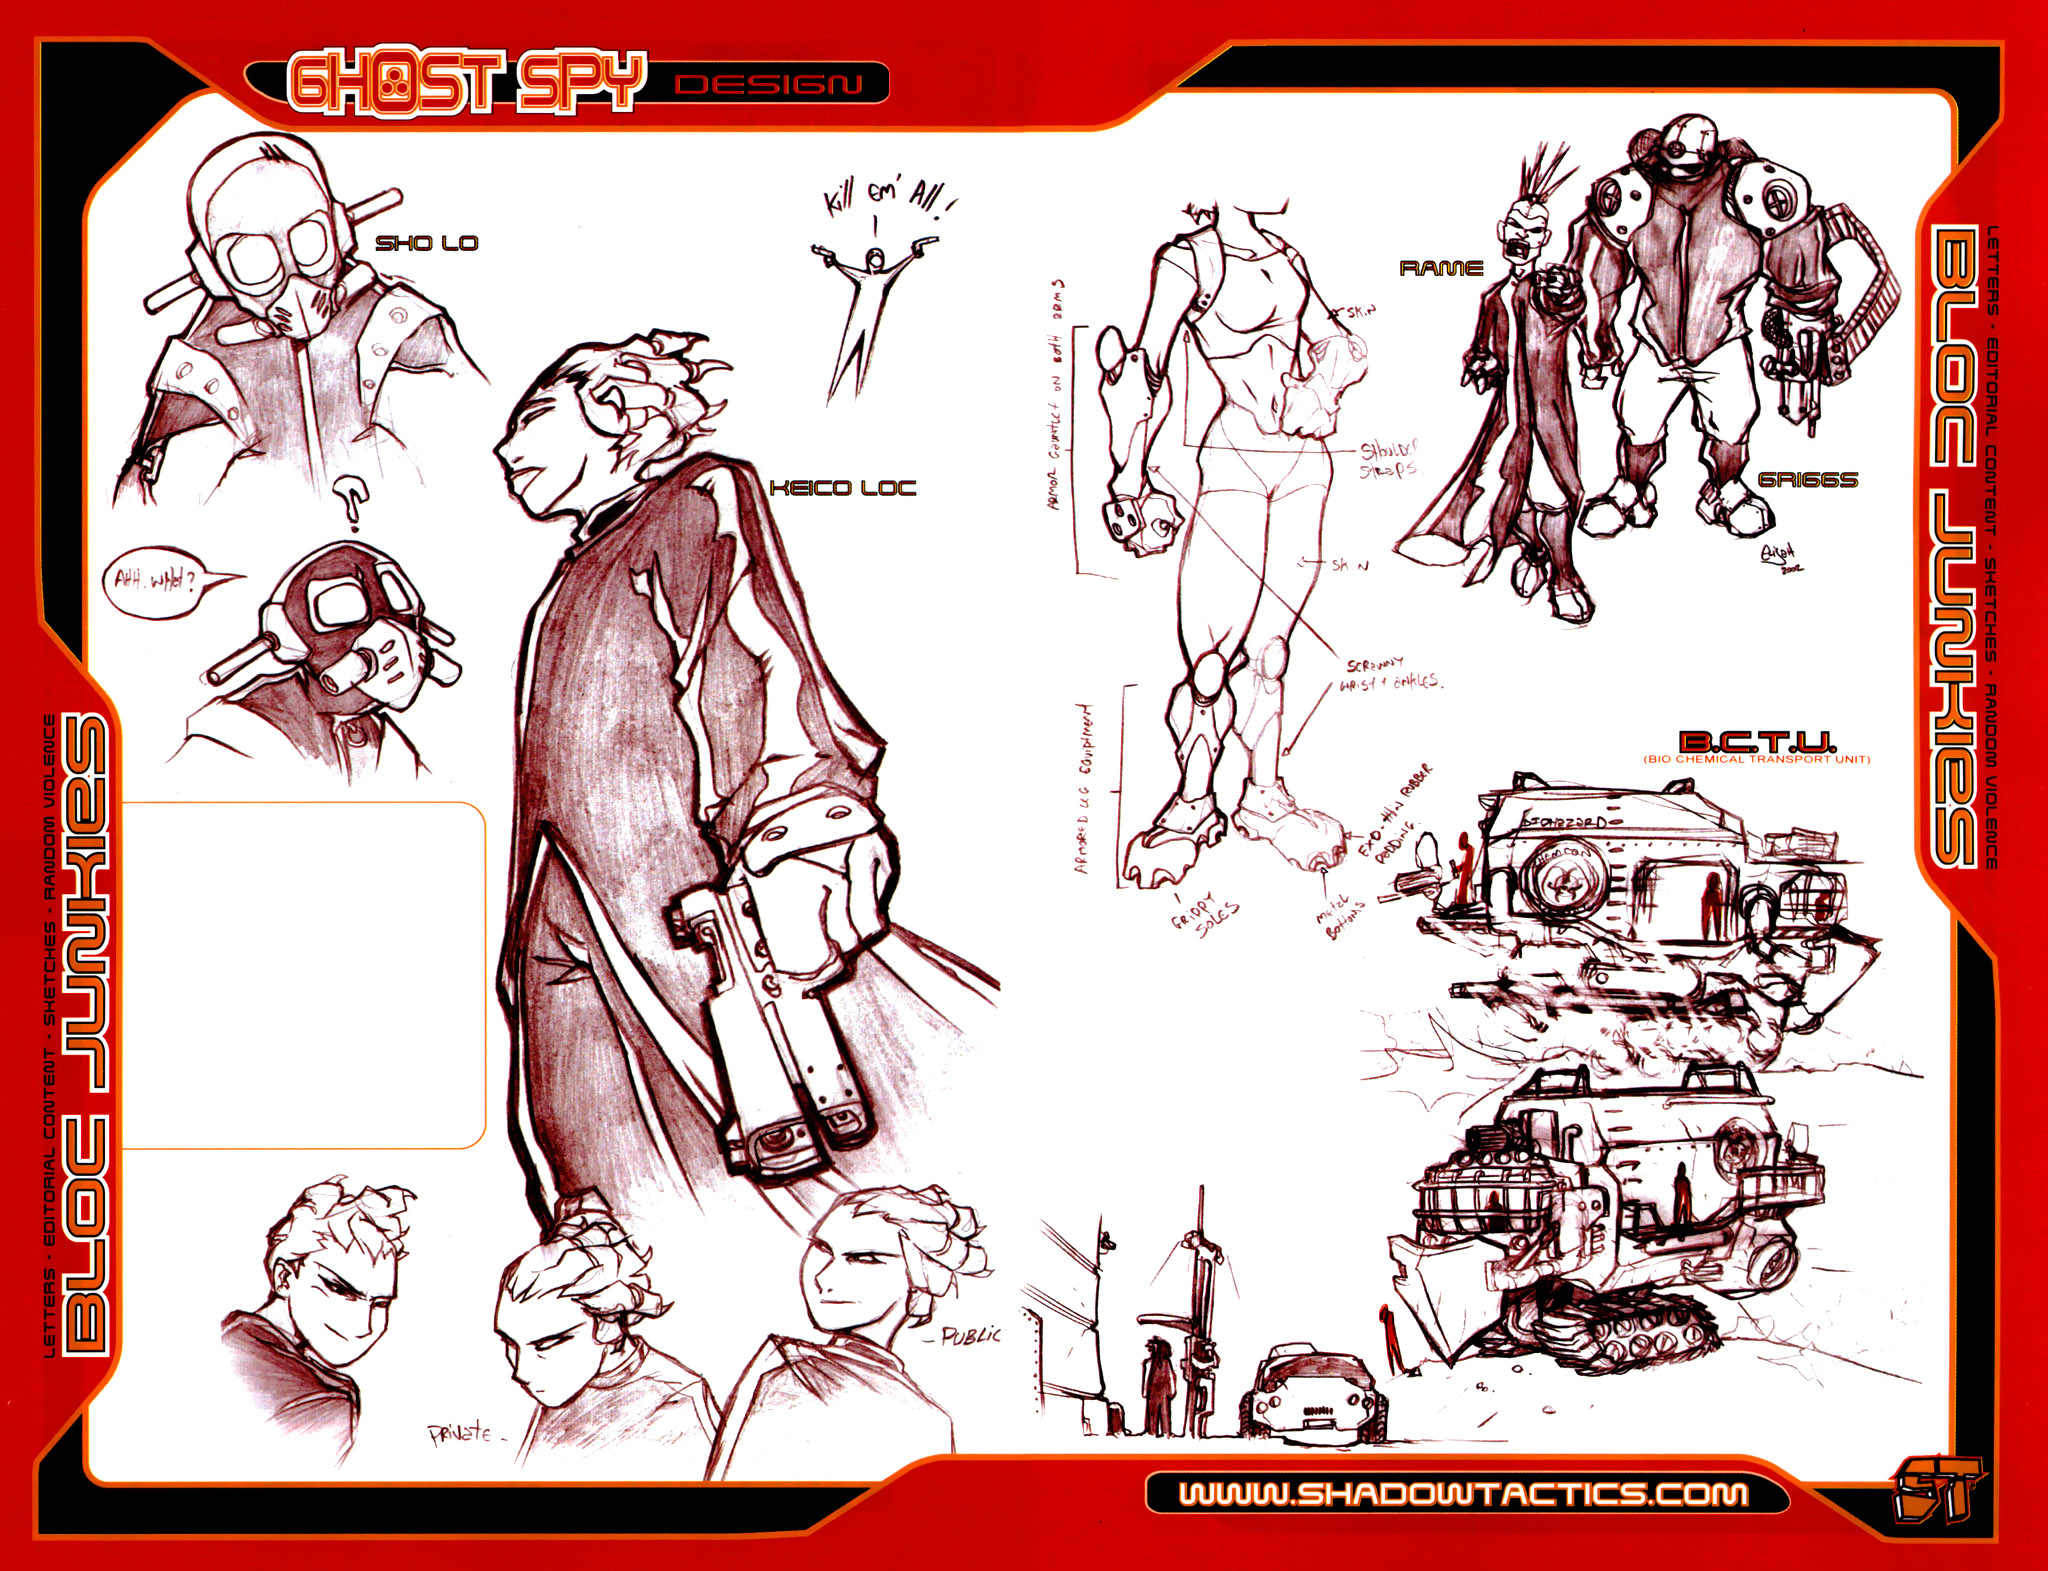 Read online Ghost Spy comic -  Issue #4 - 24